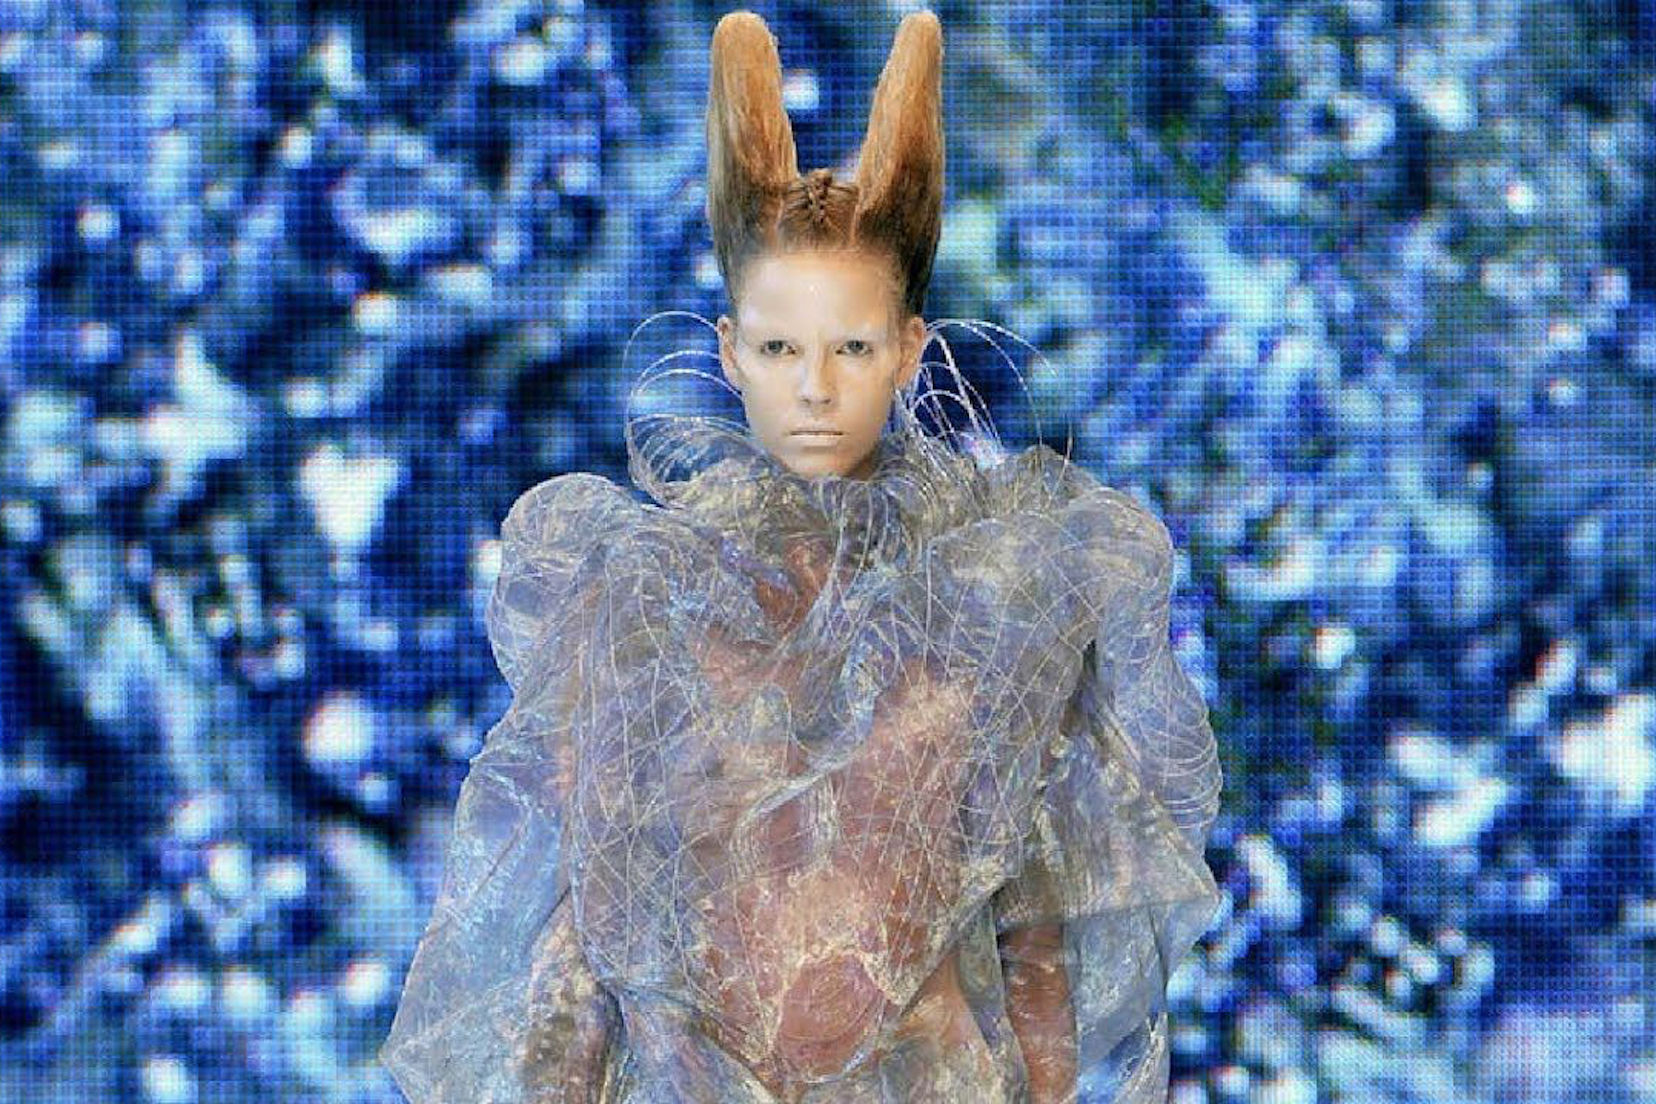 GIVENCHY HAUTE COUTURE Fall 1997 by - Unforgettable Runway